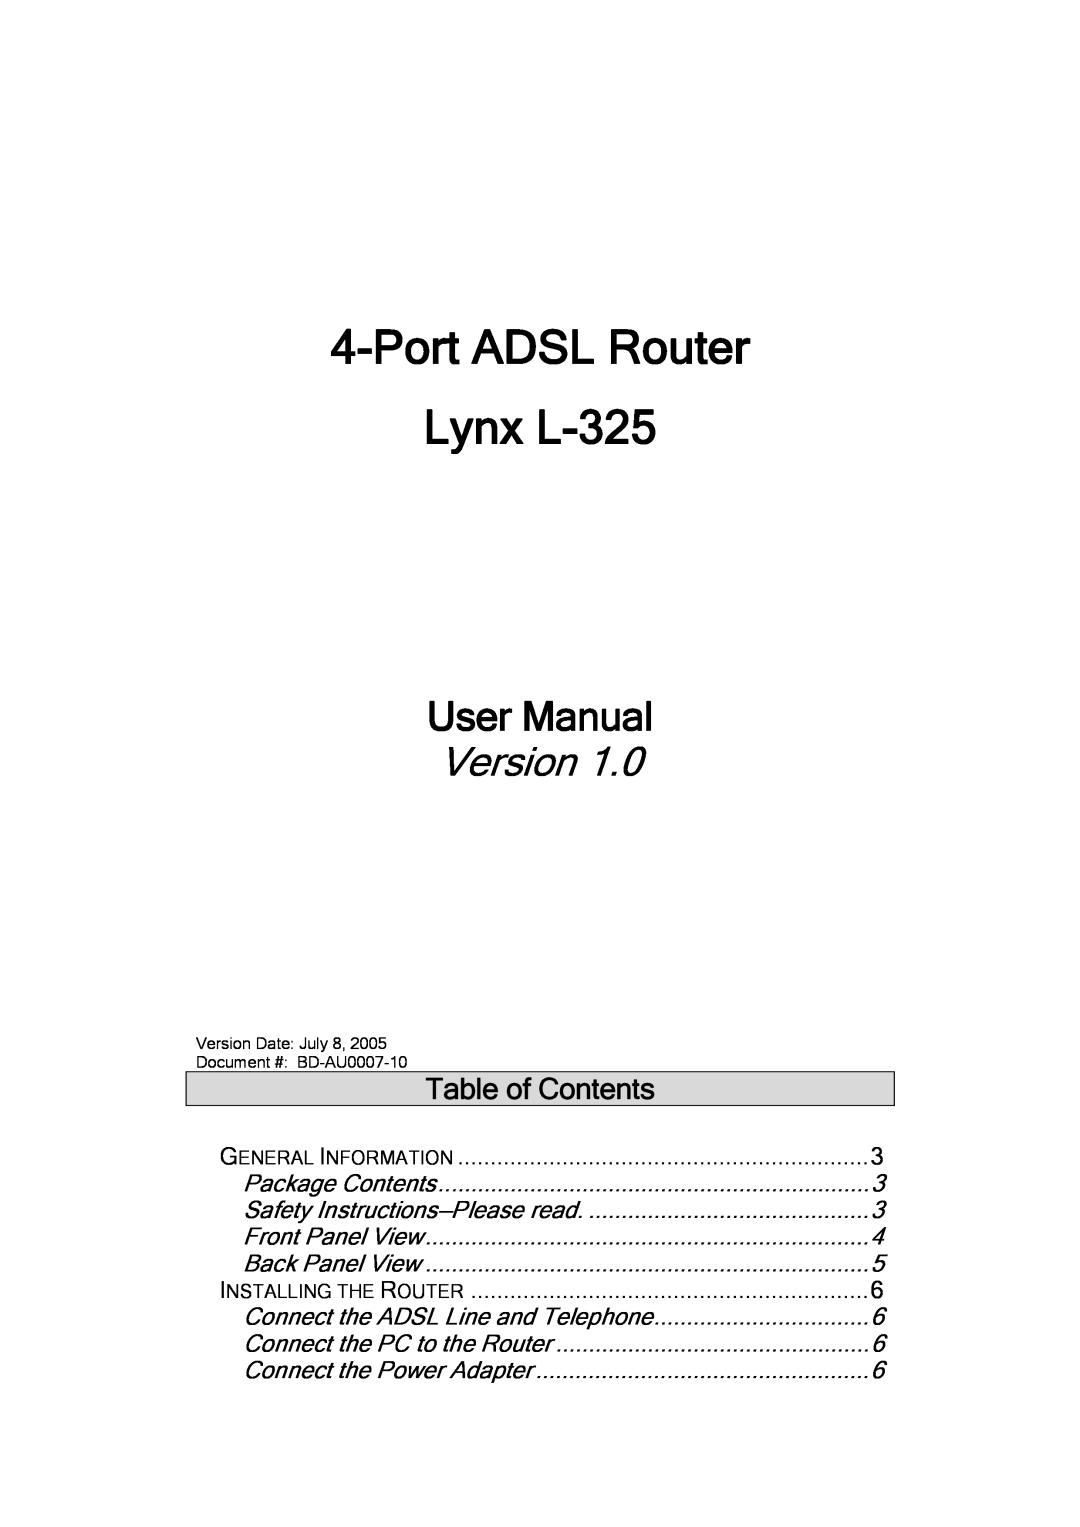 Lynx user manual Port ADSL Router Lynx L-325, User Manual, Table of Contents, Version Date July 8 